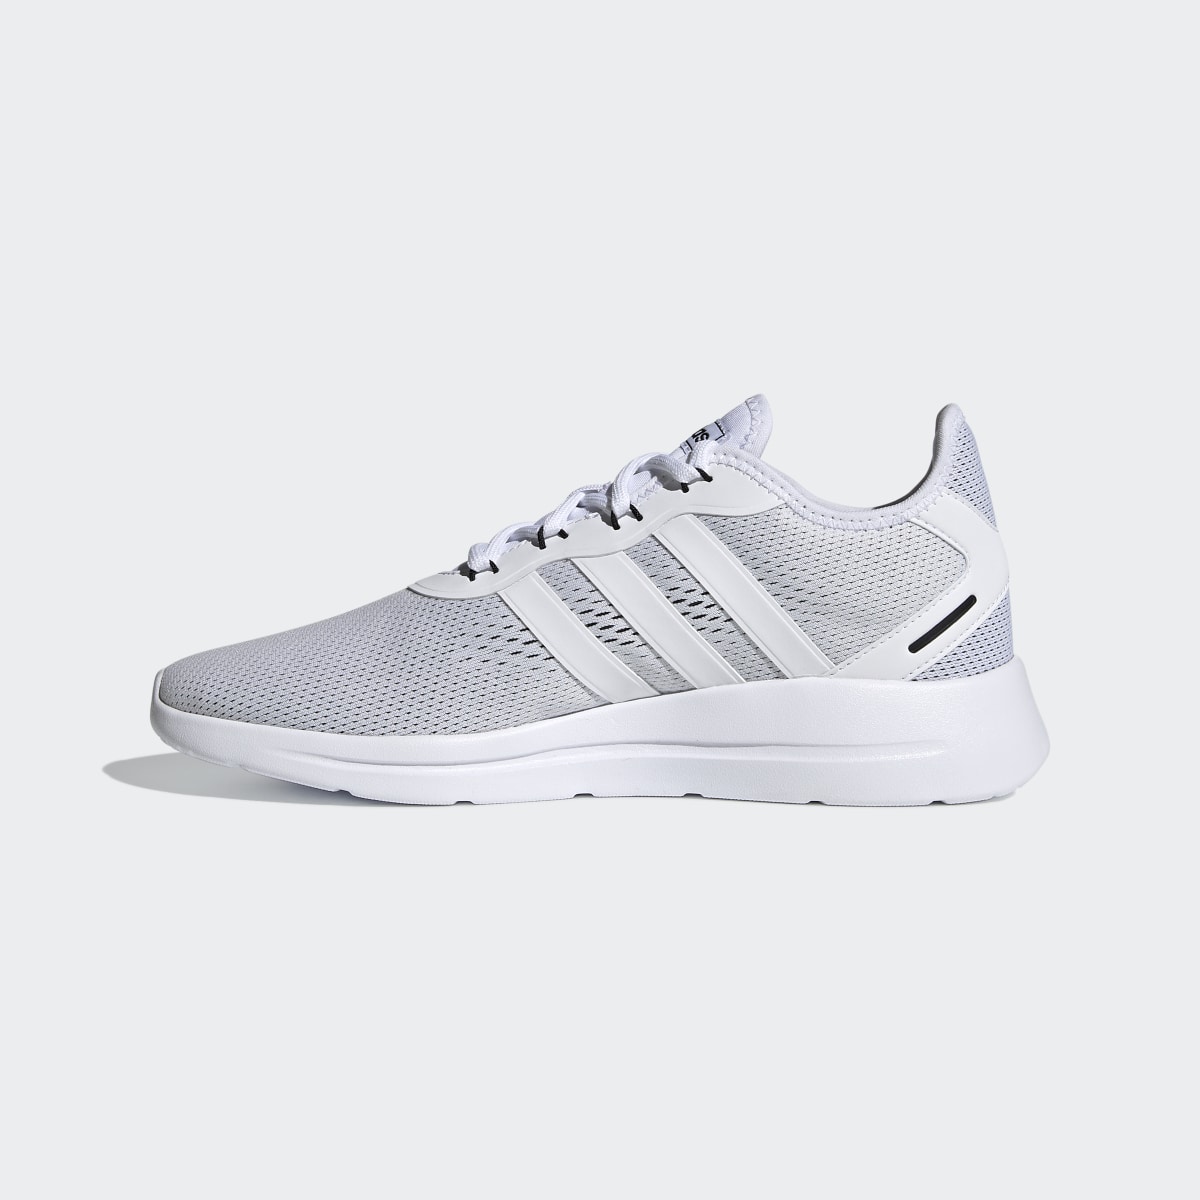 Adidas Lite Racer RBN 2.0 Shoes. 7